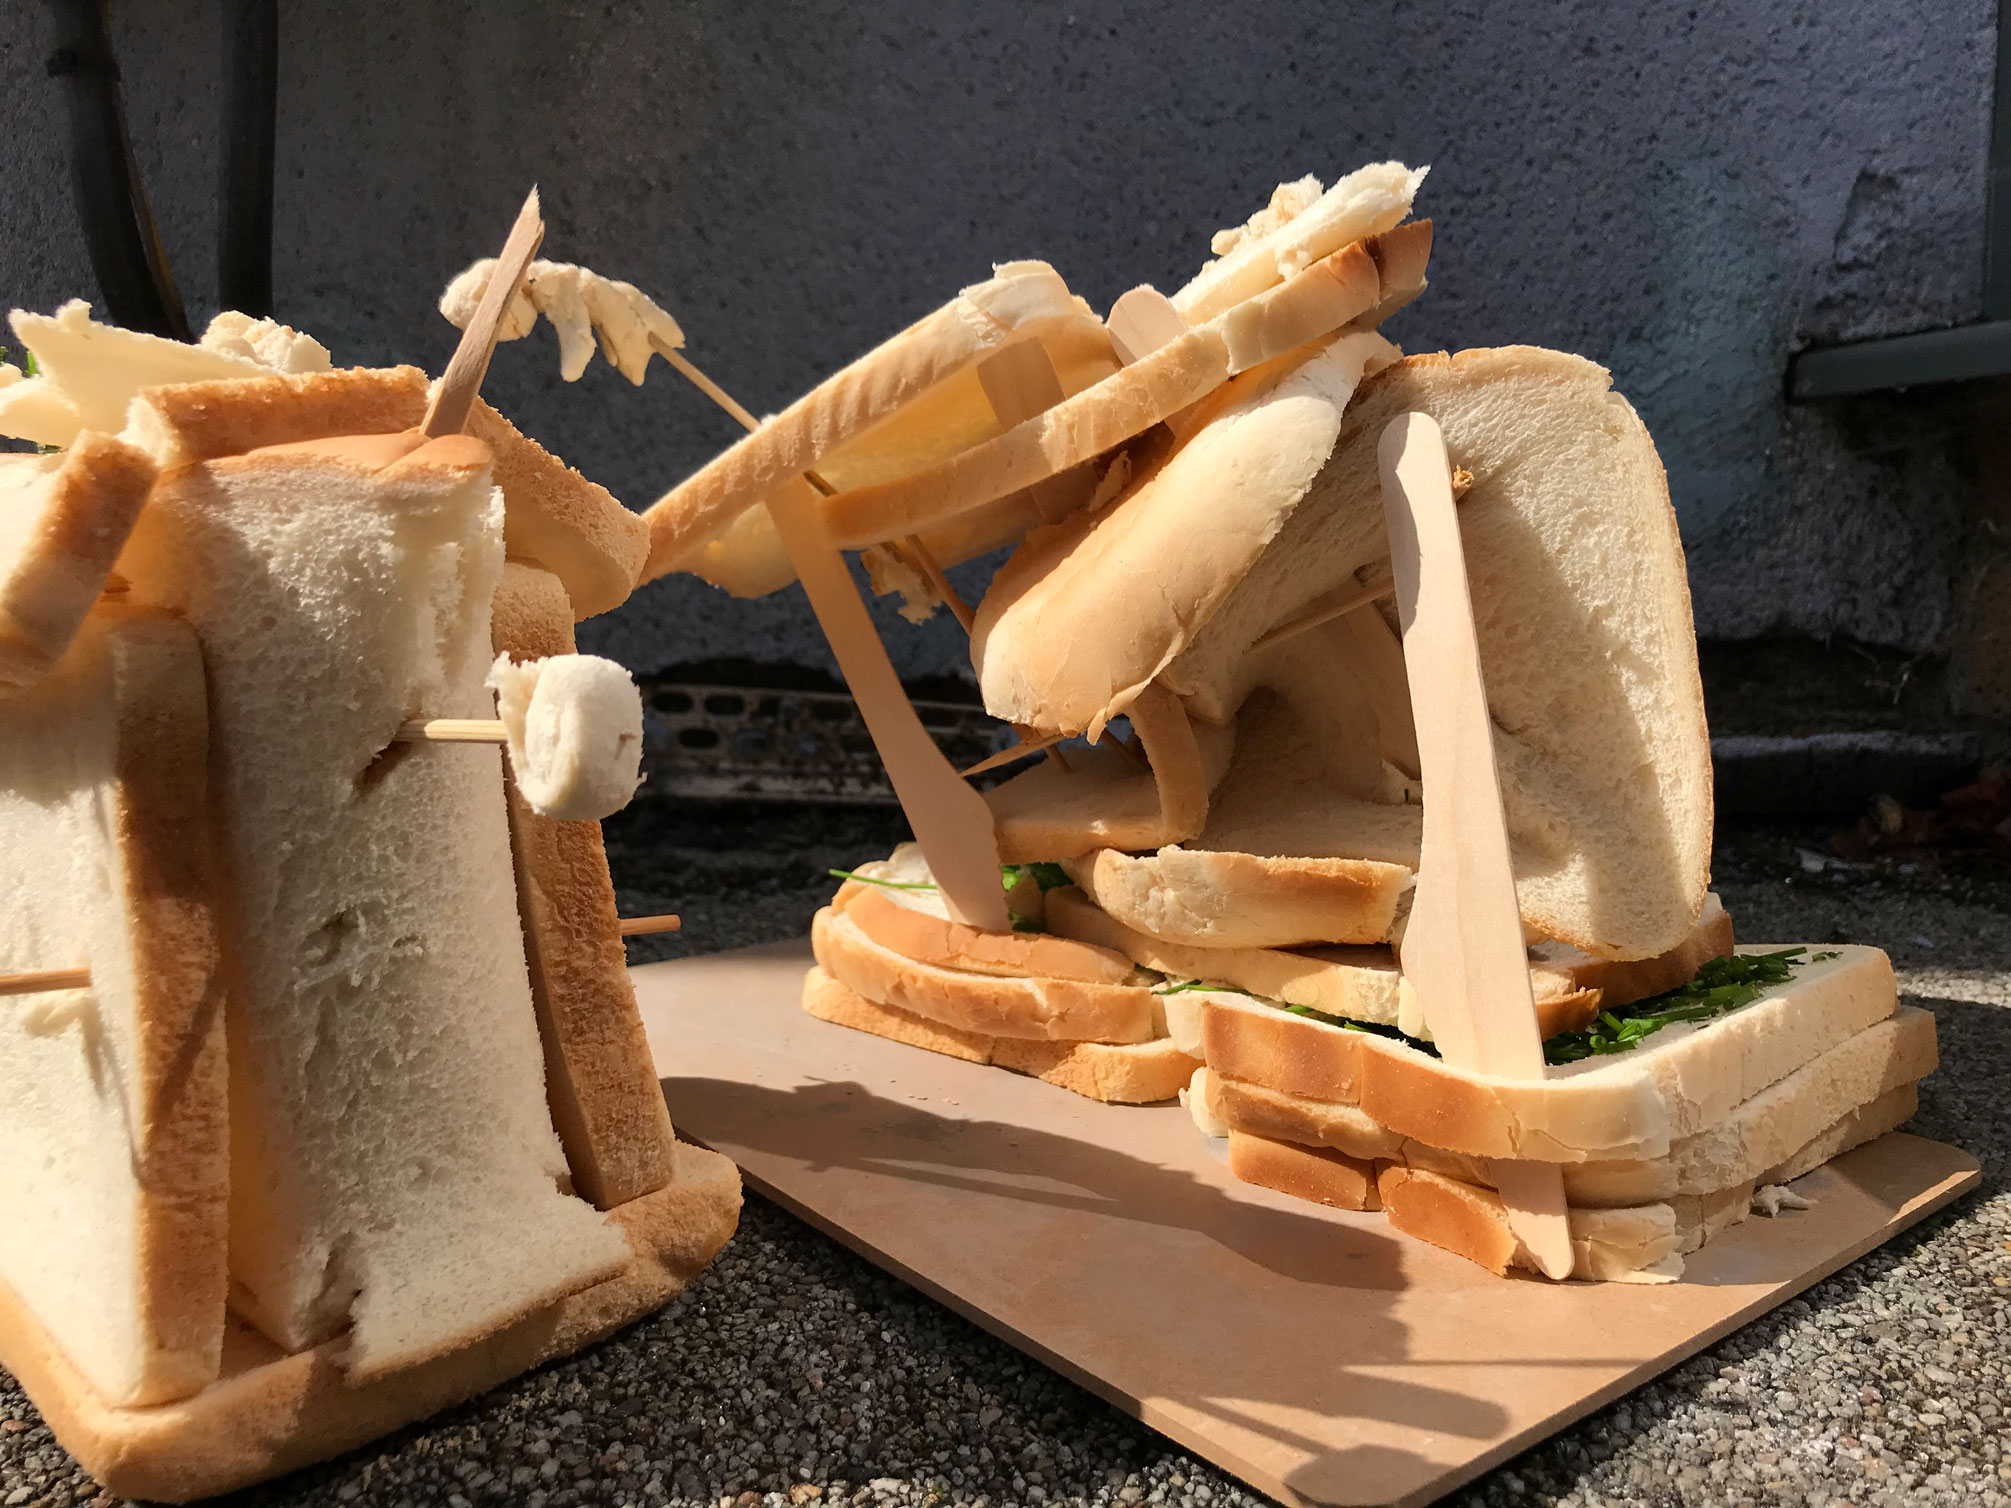 A sculpture made out of sliced white bread